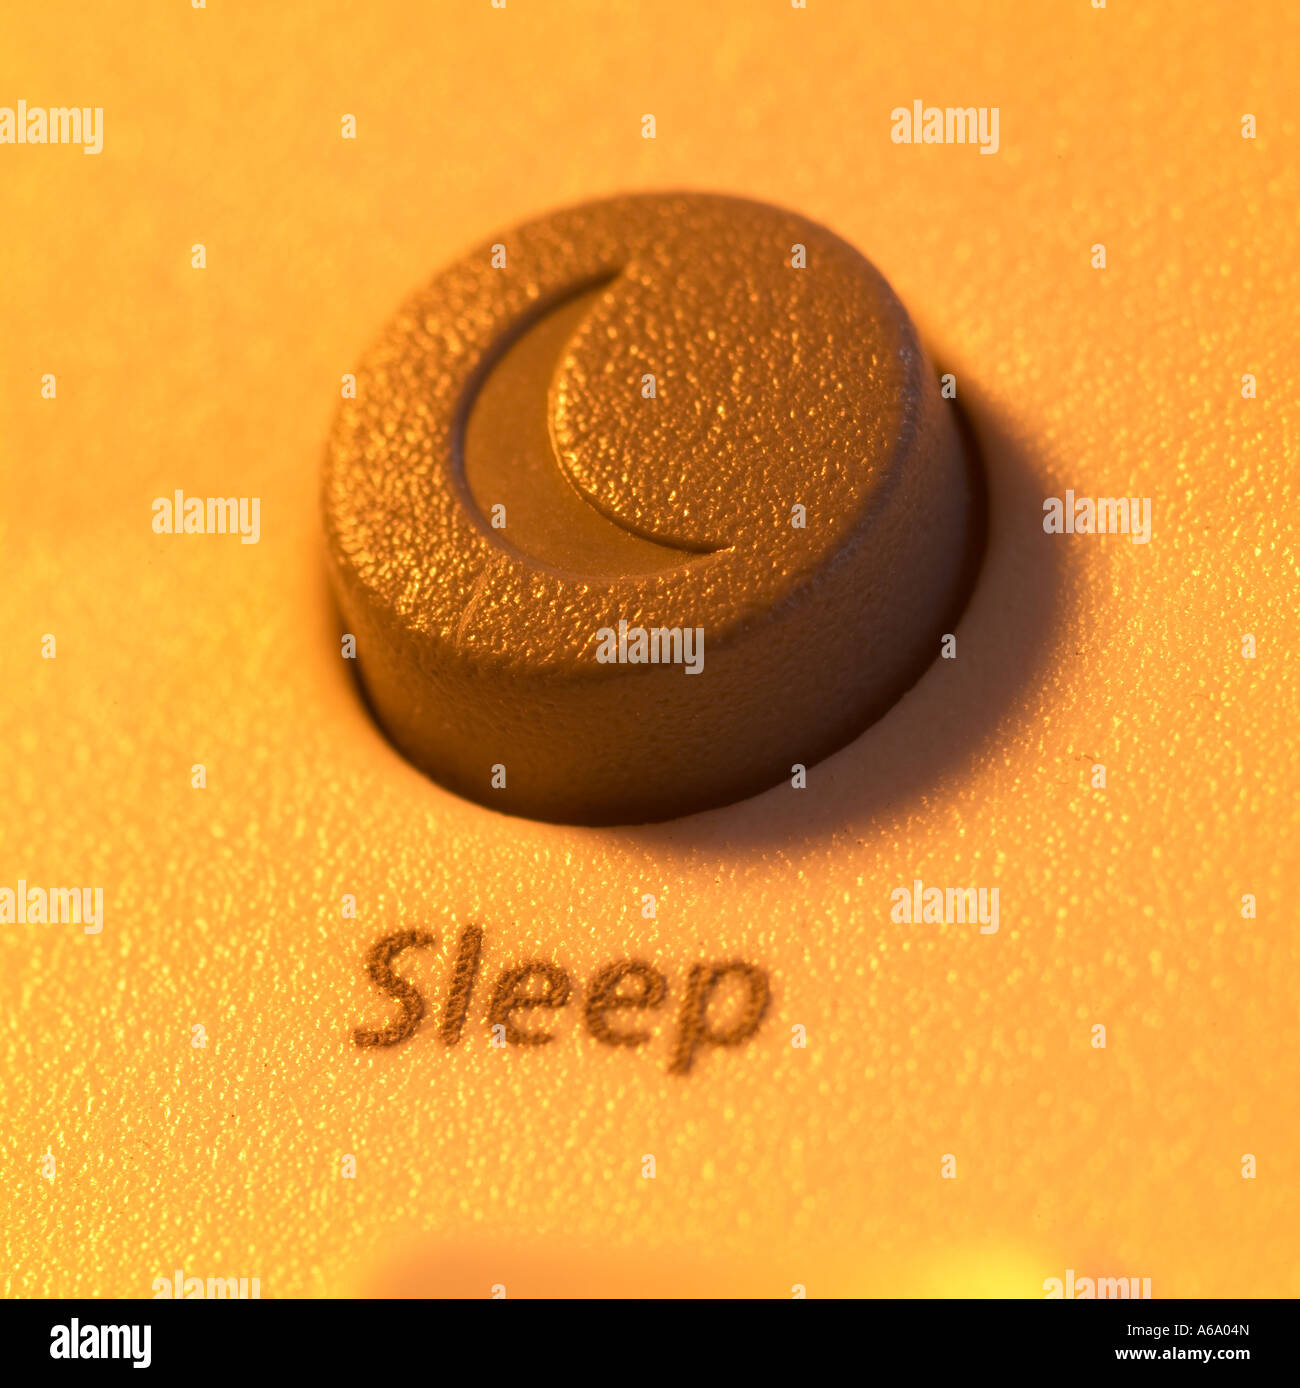 sleep icon from a computer keyboard with a warm orange glow Stock Photo